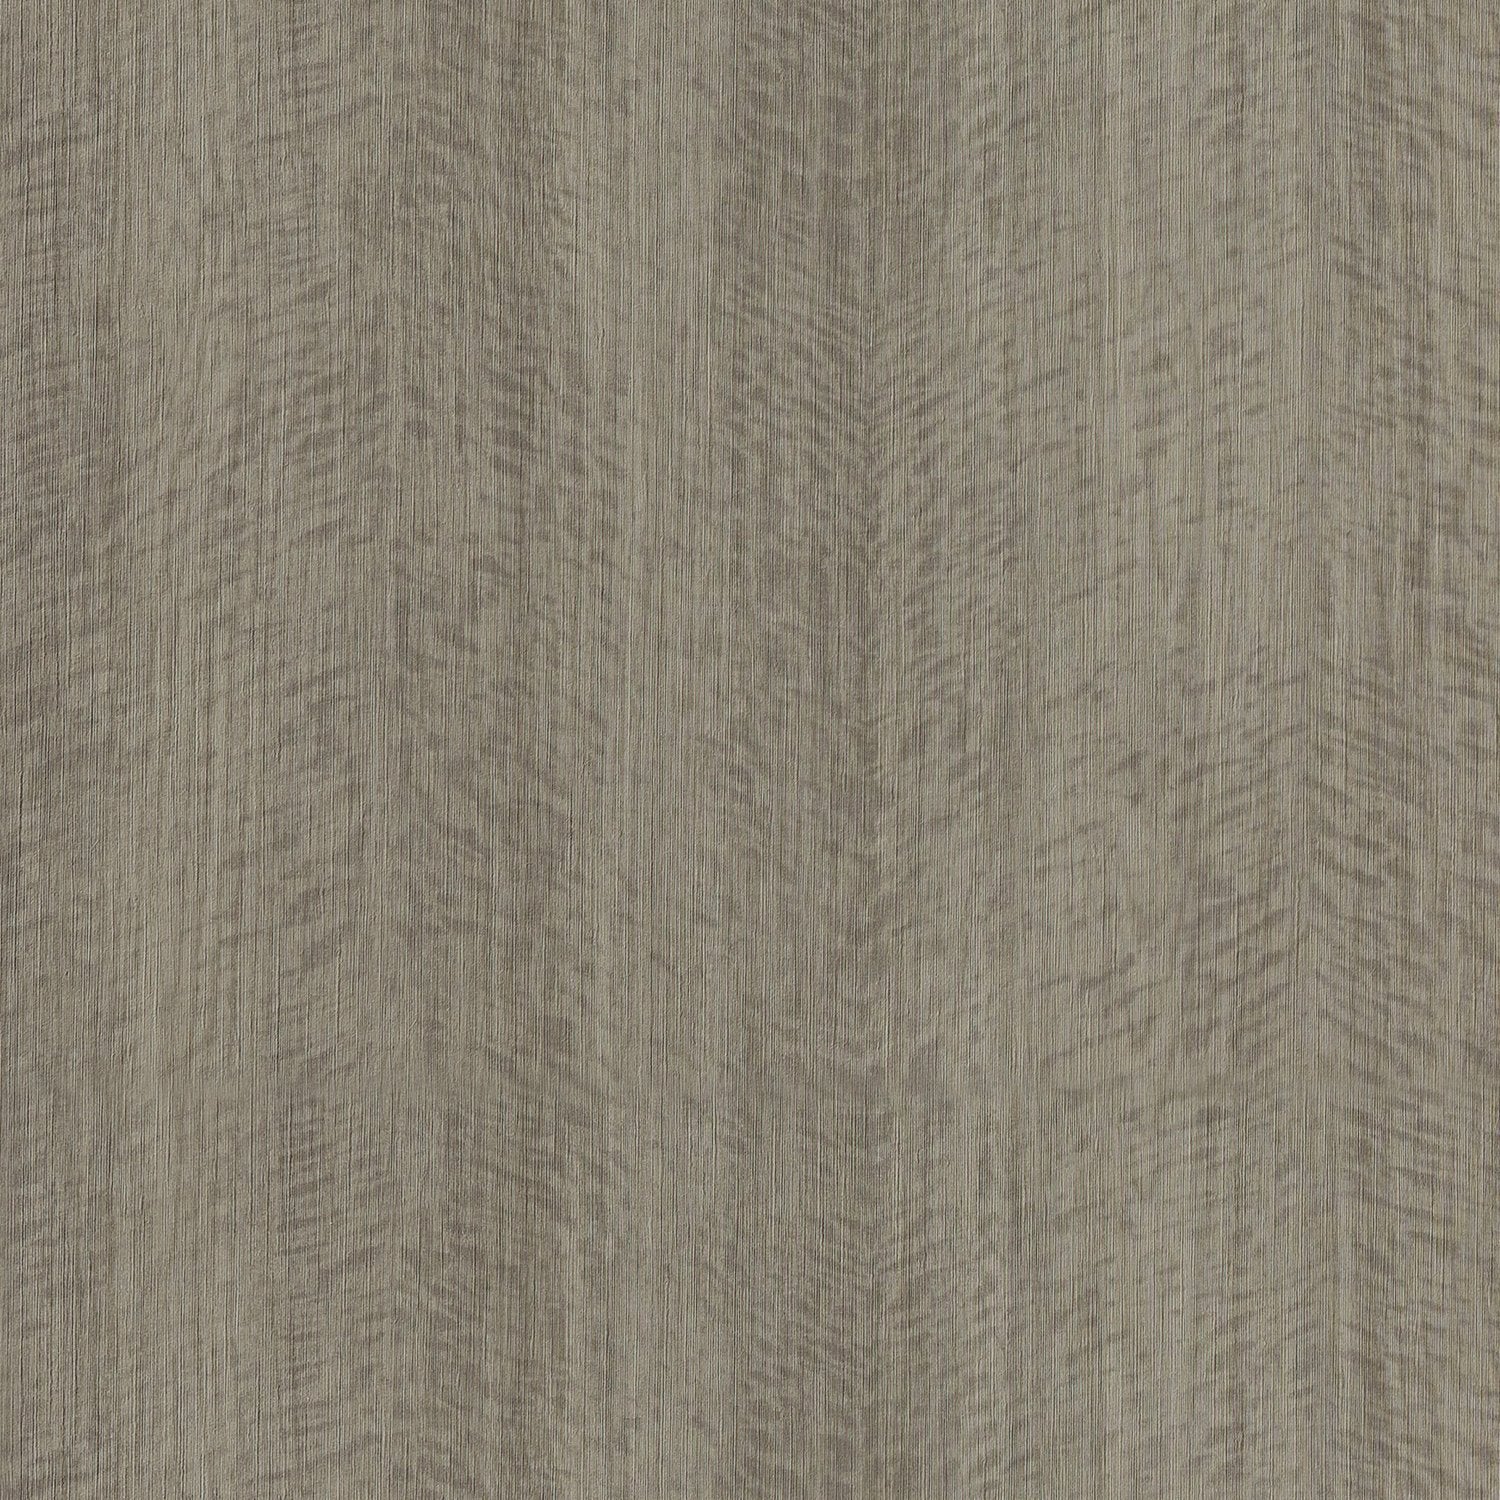 Woodn't It Be Nice - Y47876 - Wallcovering - Vycon - Kube Contract